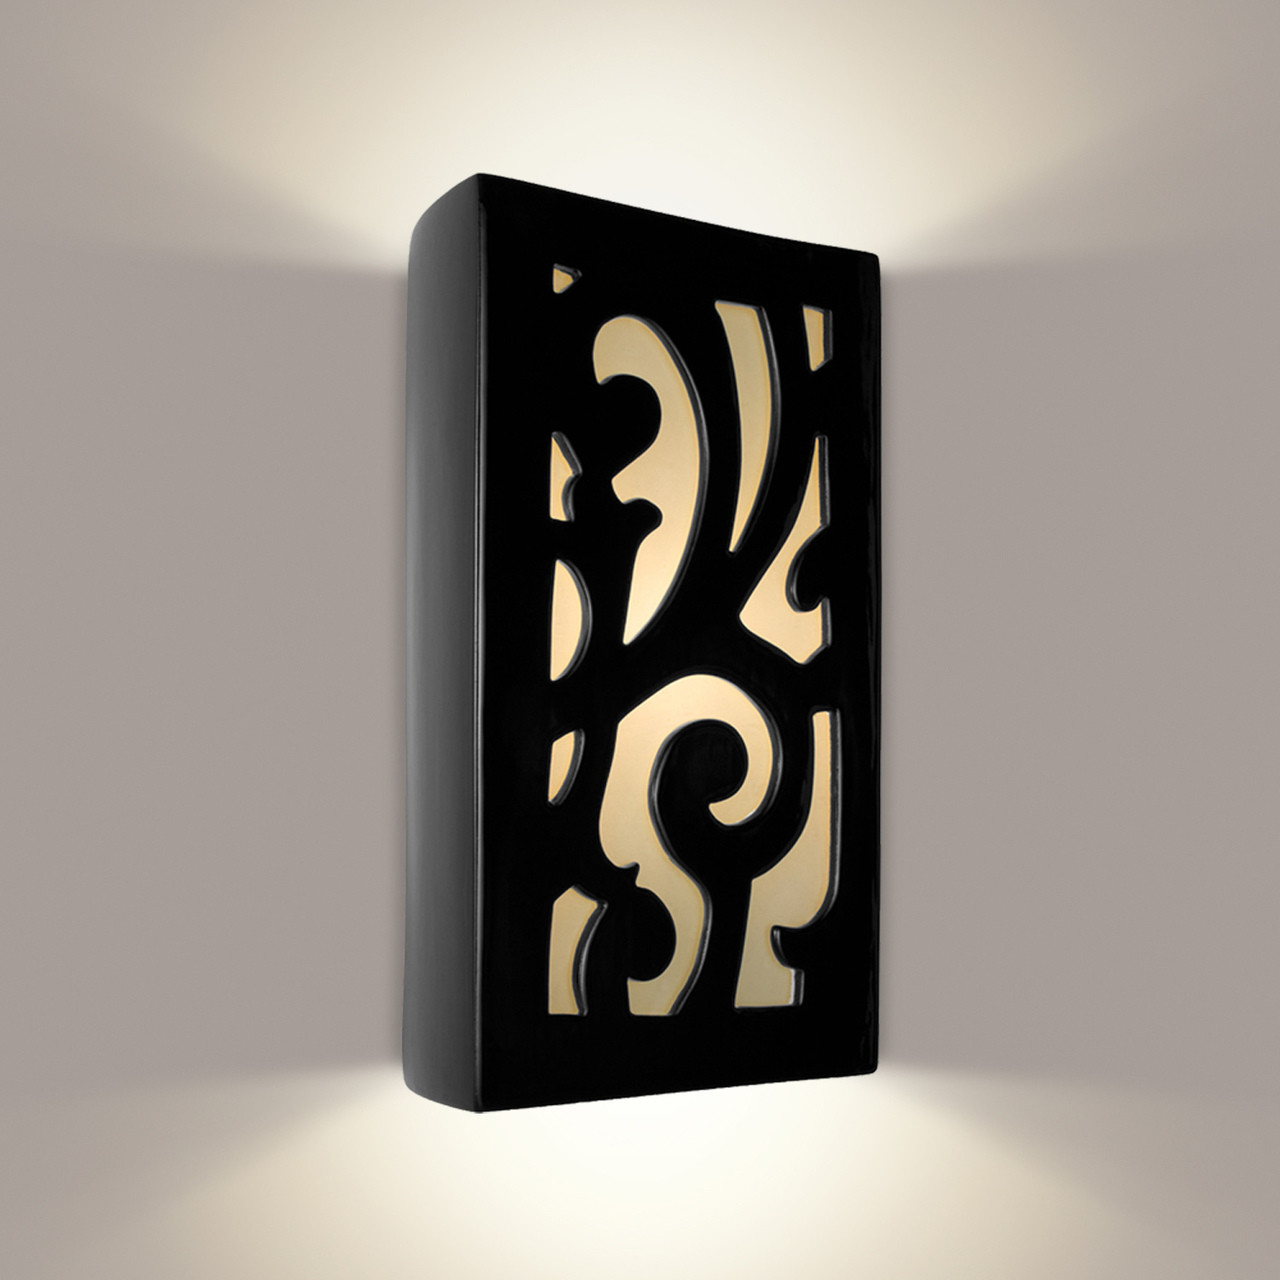 A19 Lighting RE112-BG-WF 1-Light Cathedral Wall Sconce Black Gloss and White Frost